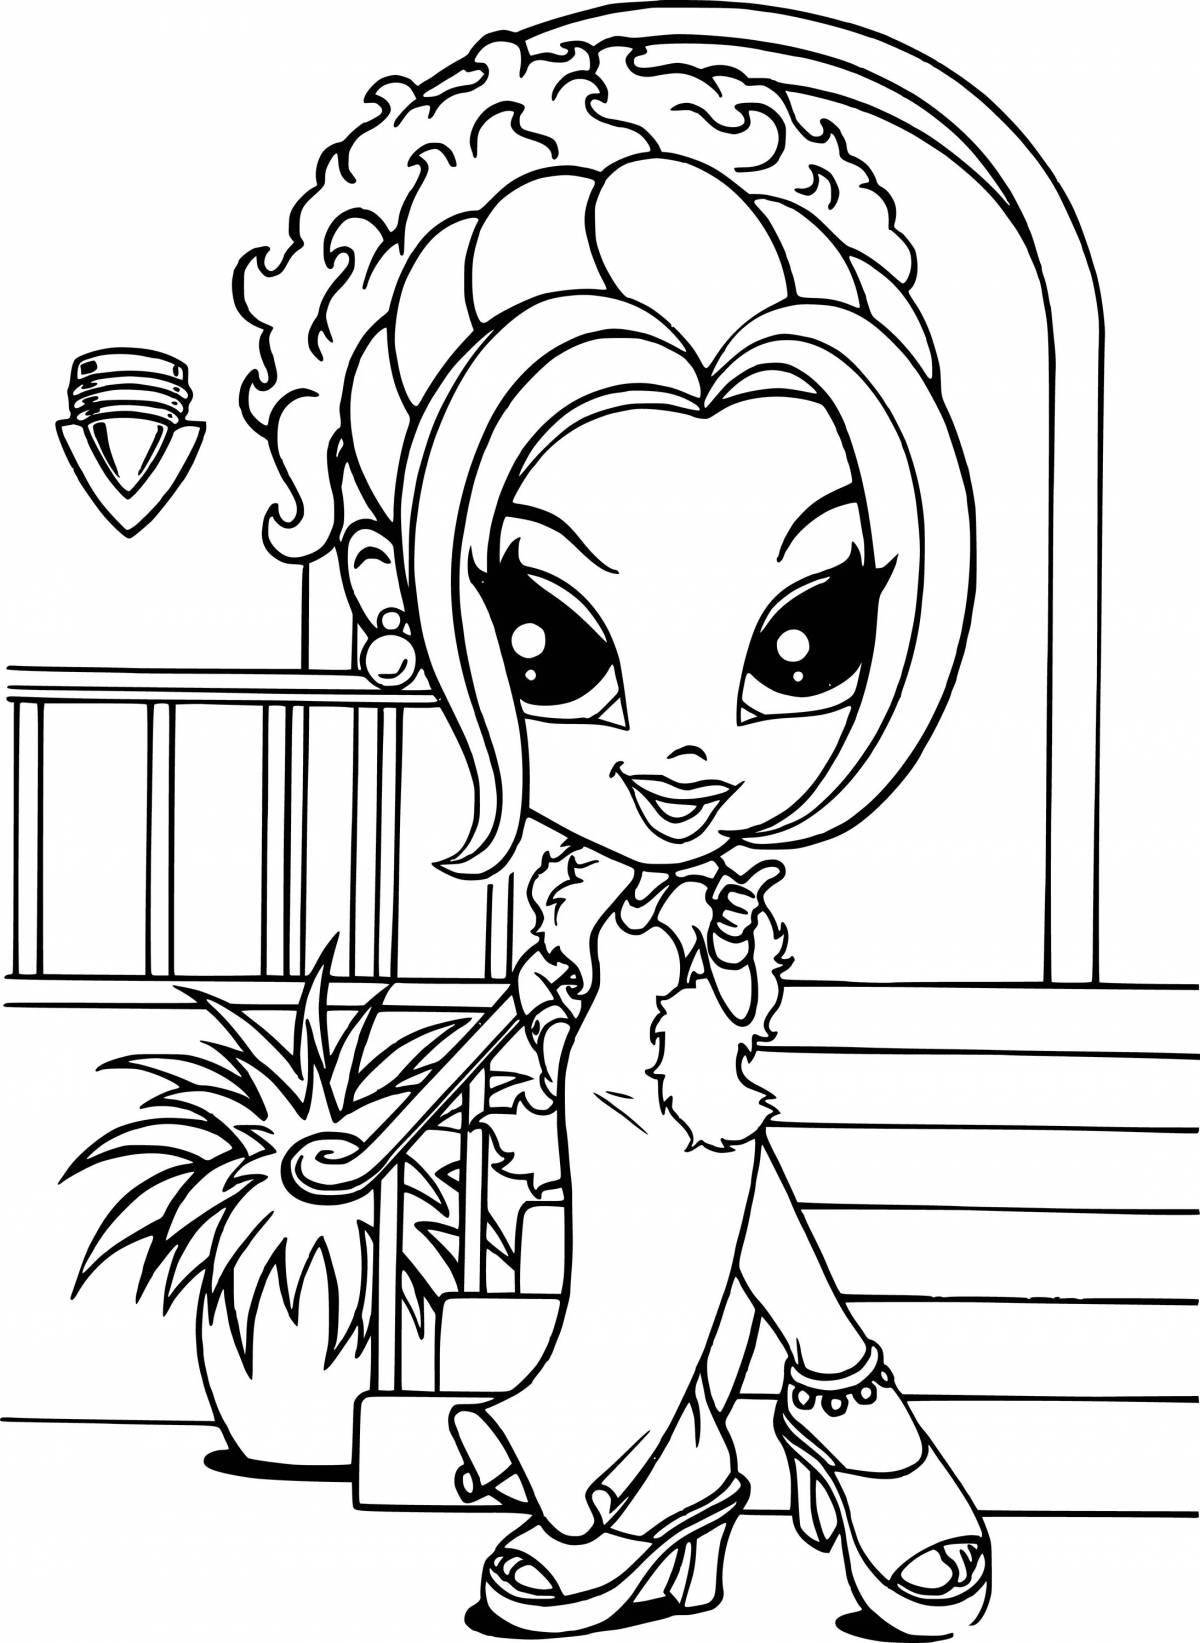 Carnival coloring book for girls 10